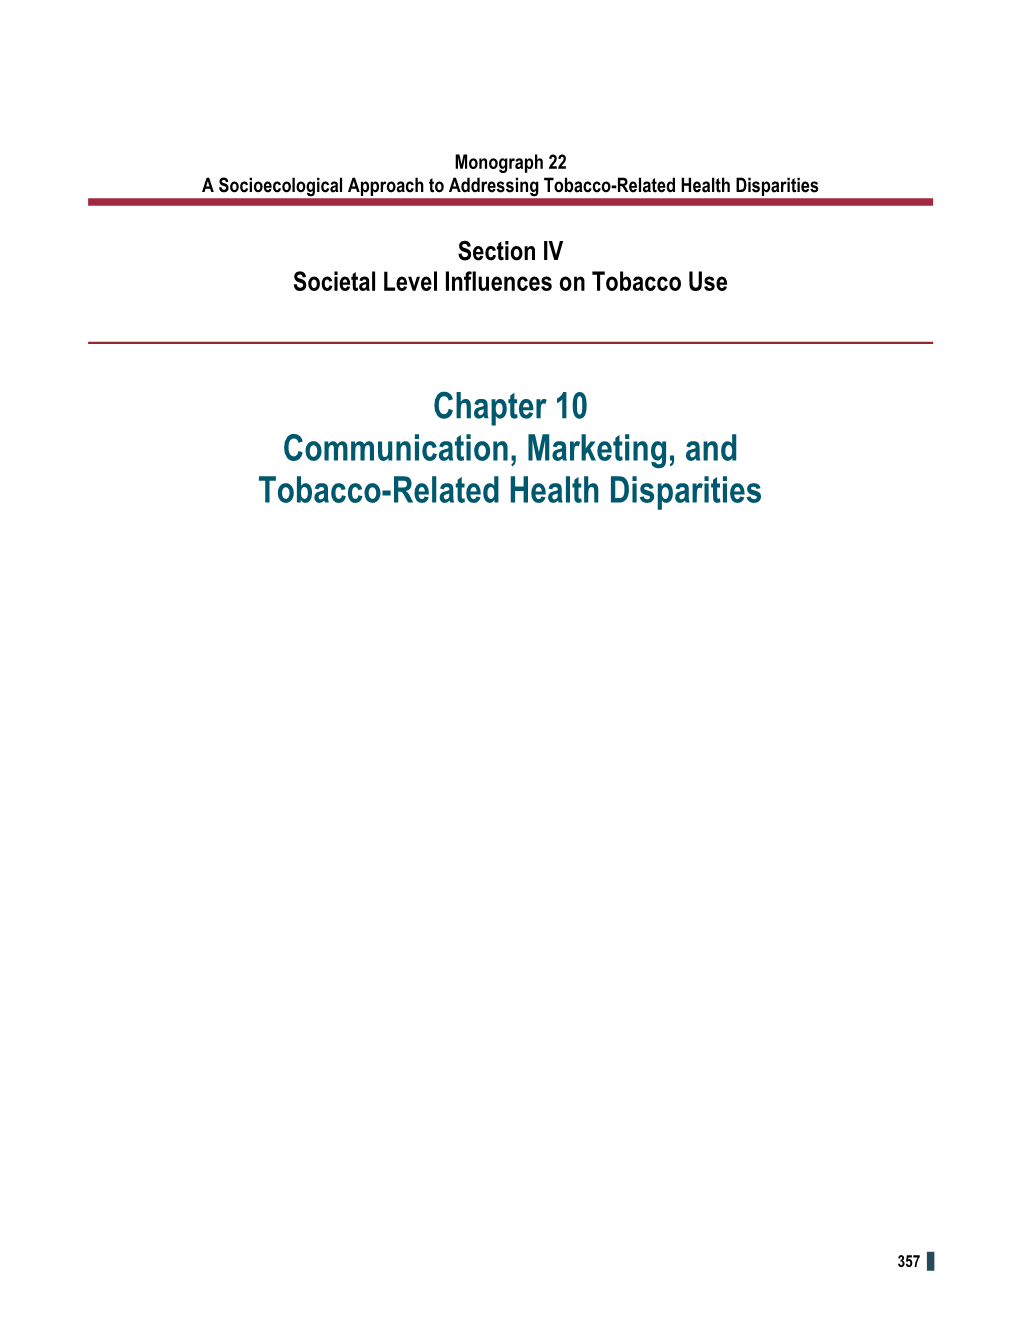 Communication, Marketing, and Tobacco-Related Health Disparities